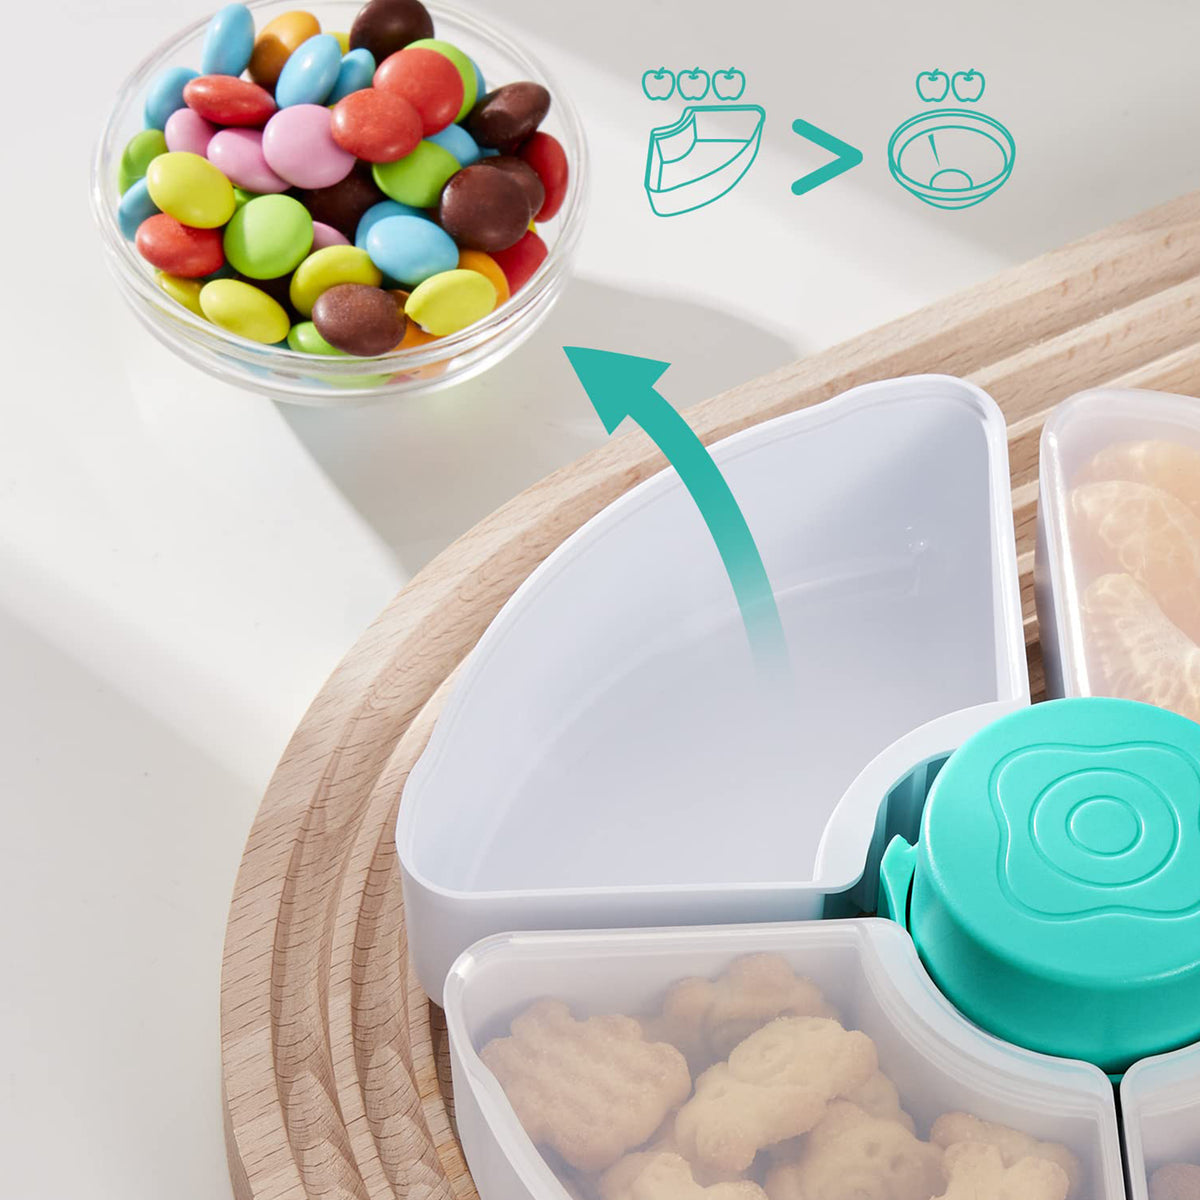 HEETA Baby Food Storage Container, Snack Box for Kids with 4